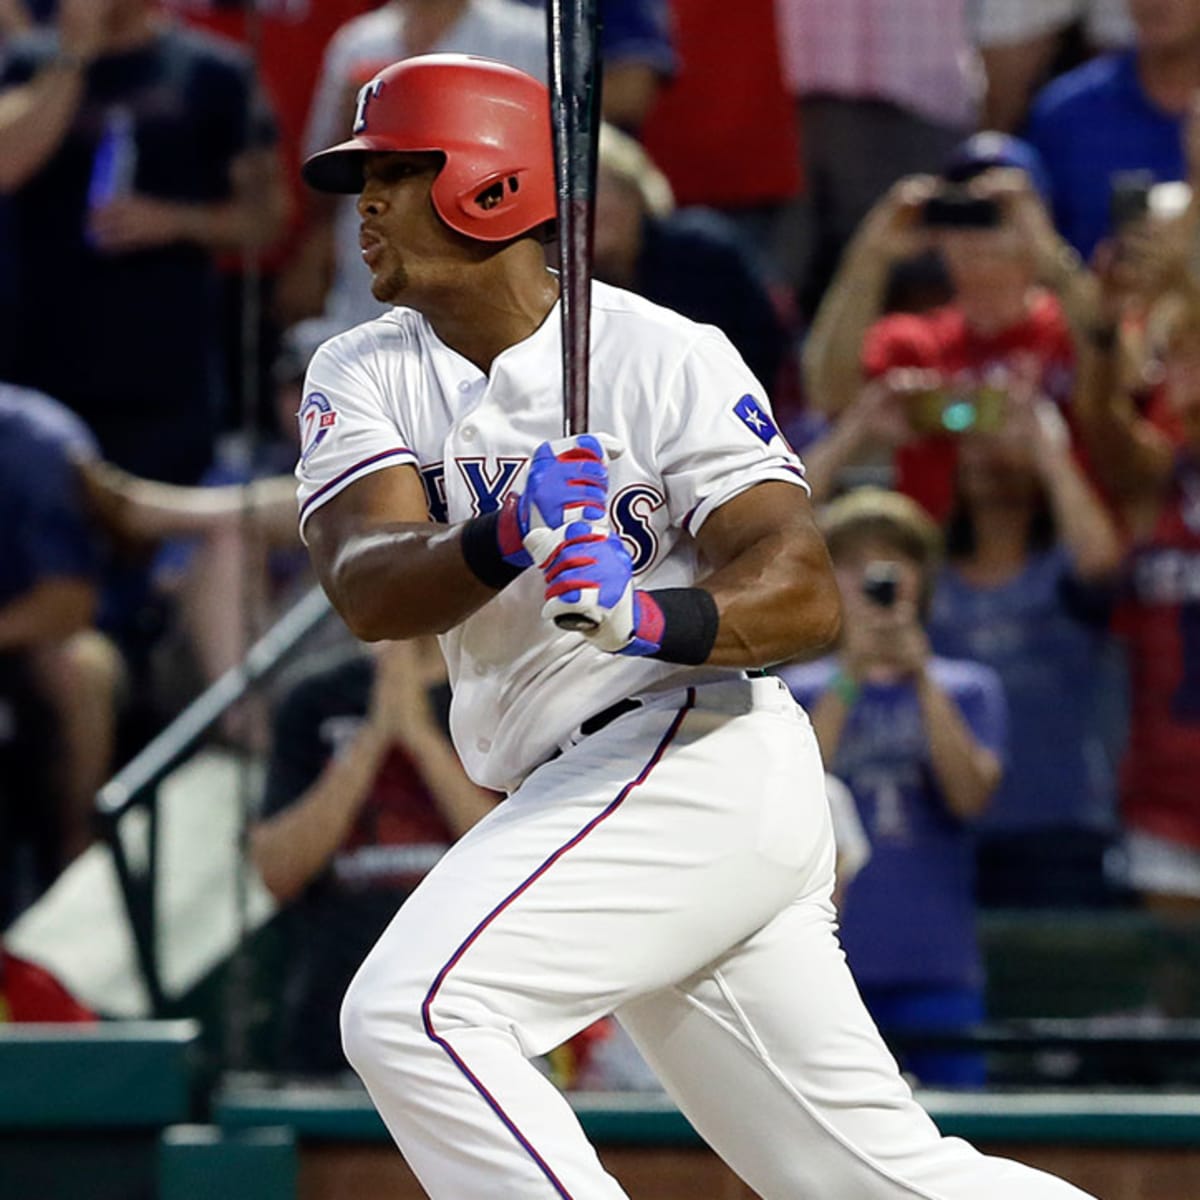 Who could have envisioned this? Why Adrian Beltre's 3,000 story is